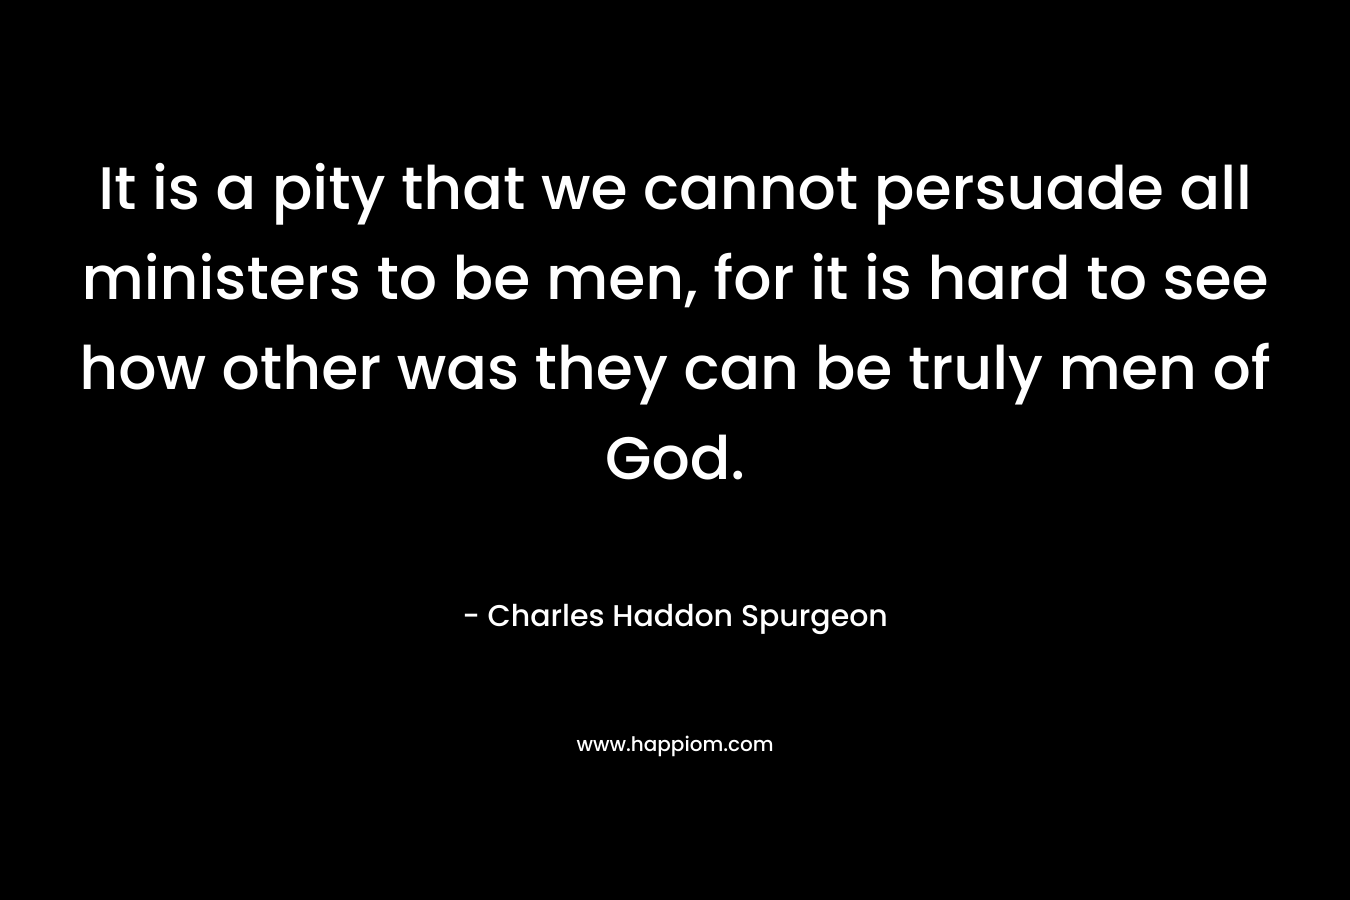 It is a pity that we cannot persuade all ministers to be men, for it is hard to see how other was they can be truly men of God. – Charles Haddon Spurgeon